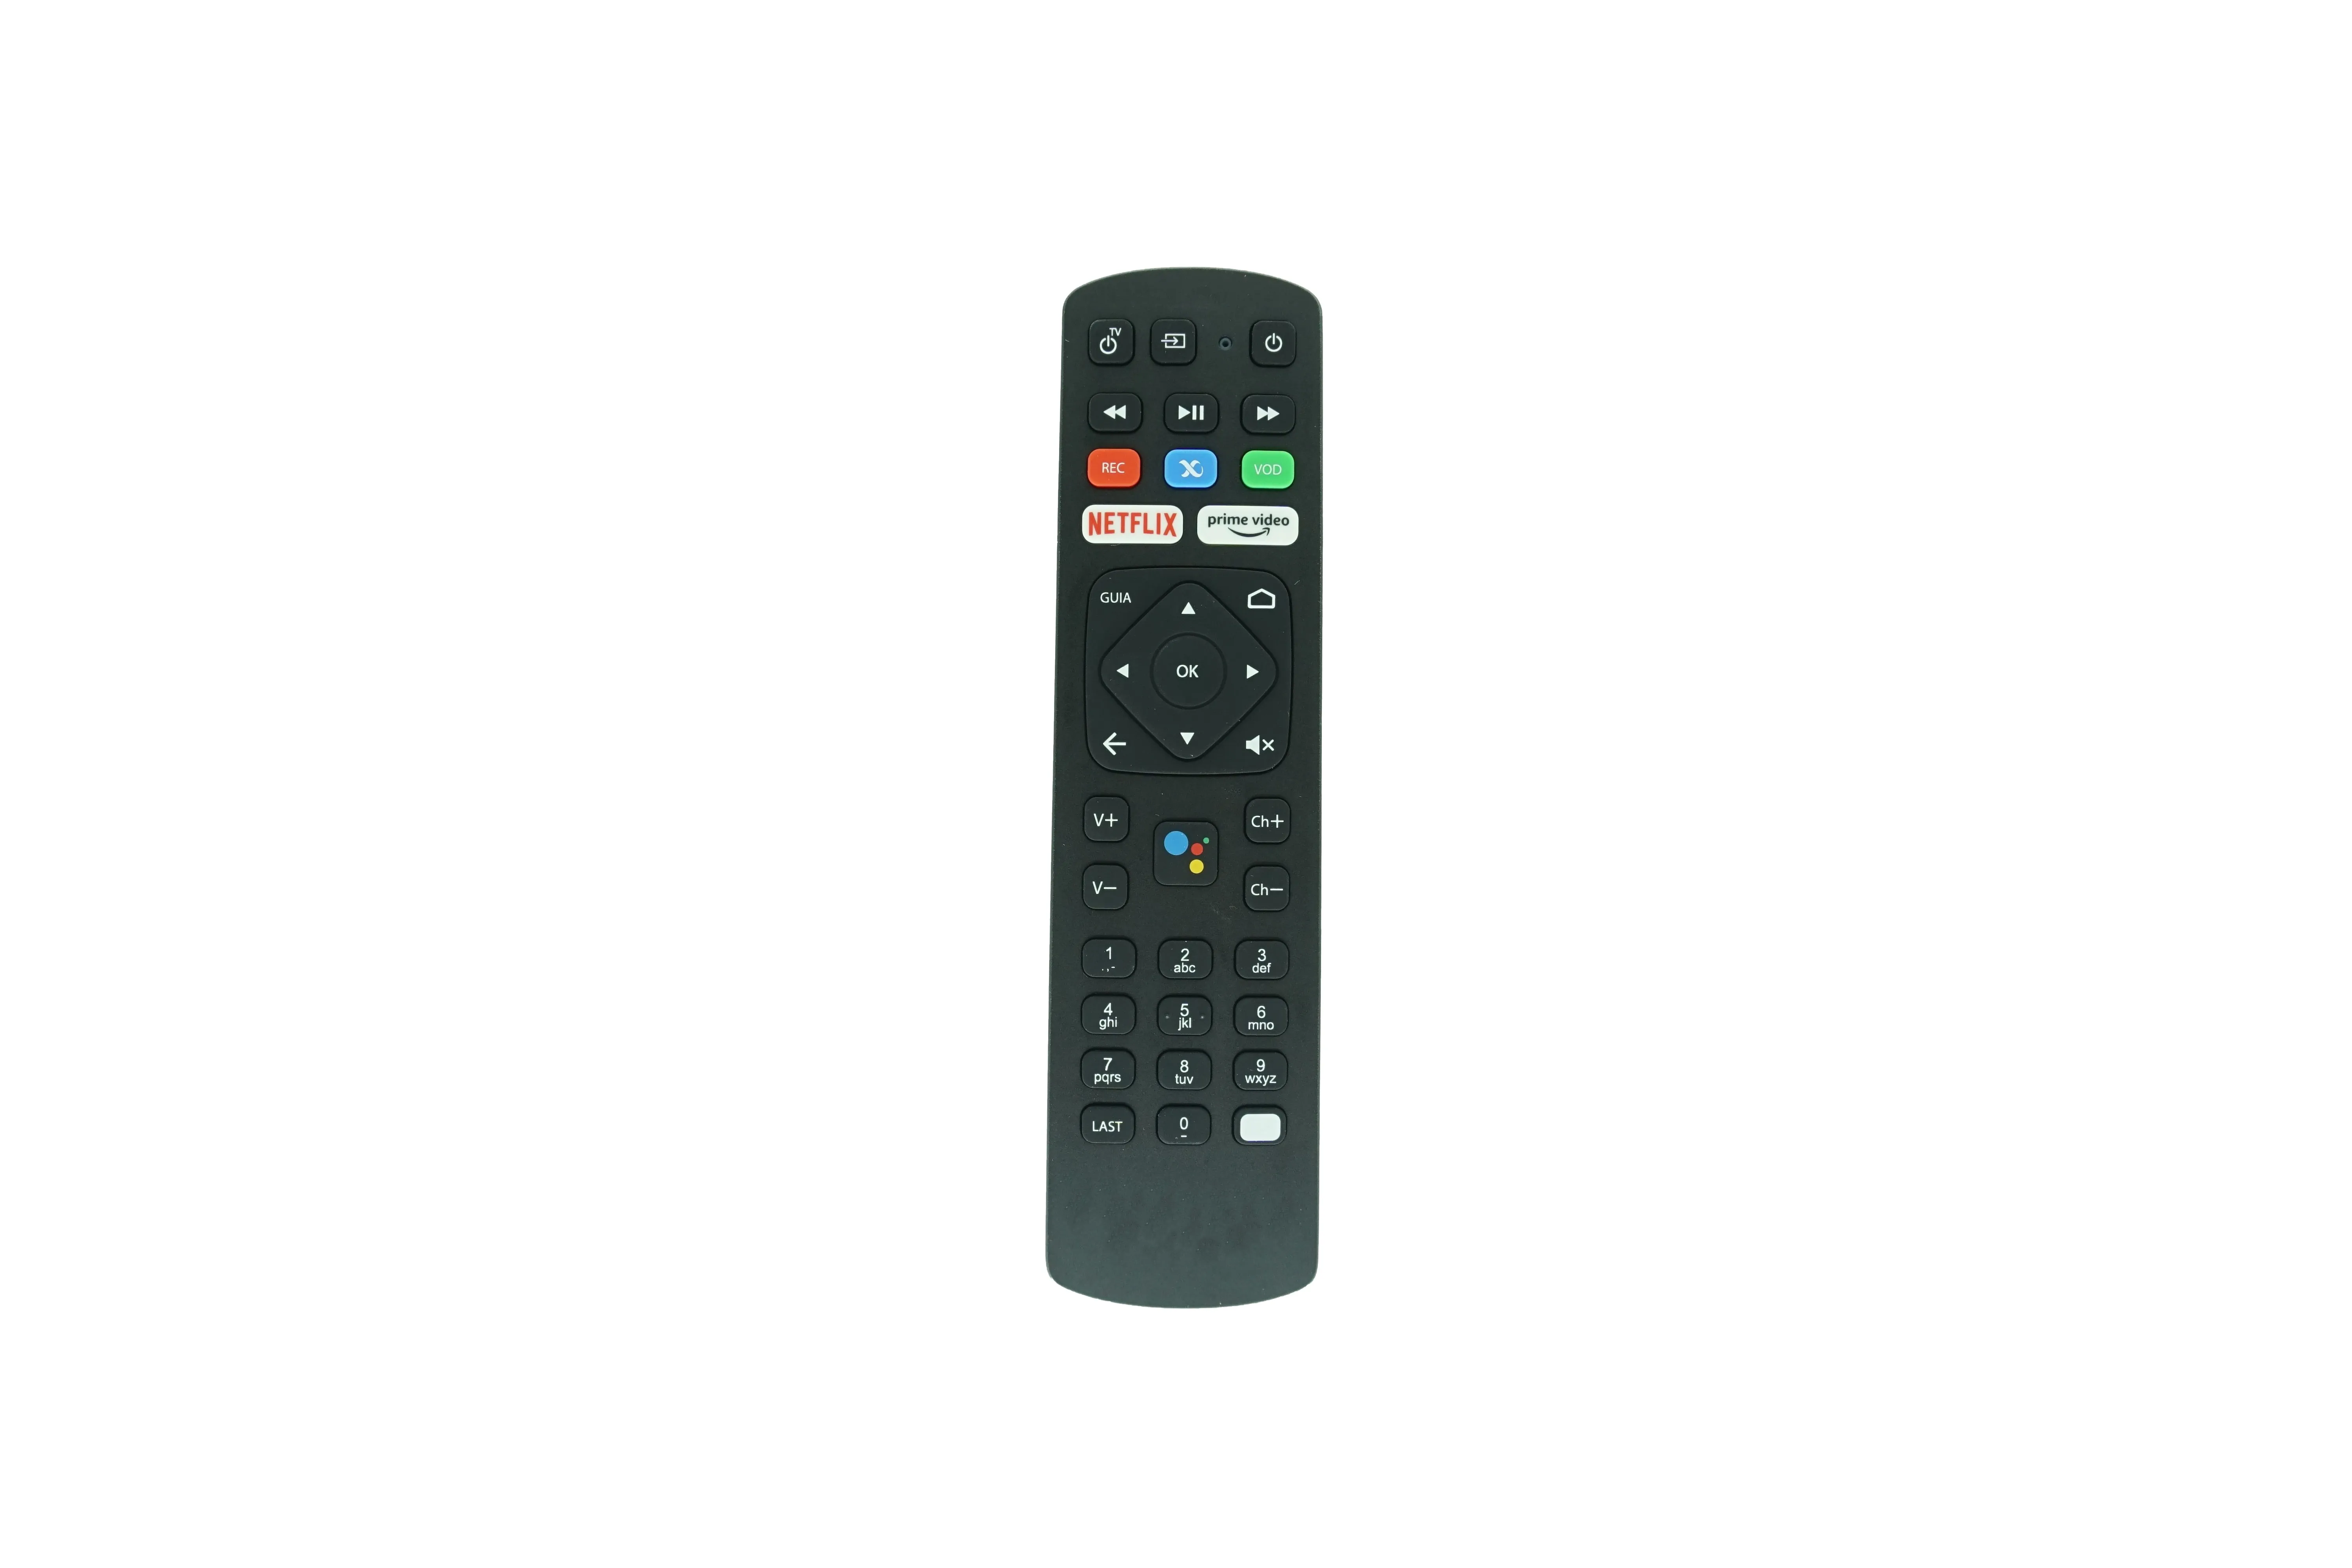 Telecomando vocale Bluetooth per Megacable Xview+ Android TV Streaming 4K Box